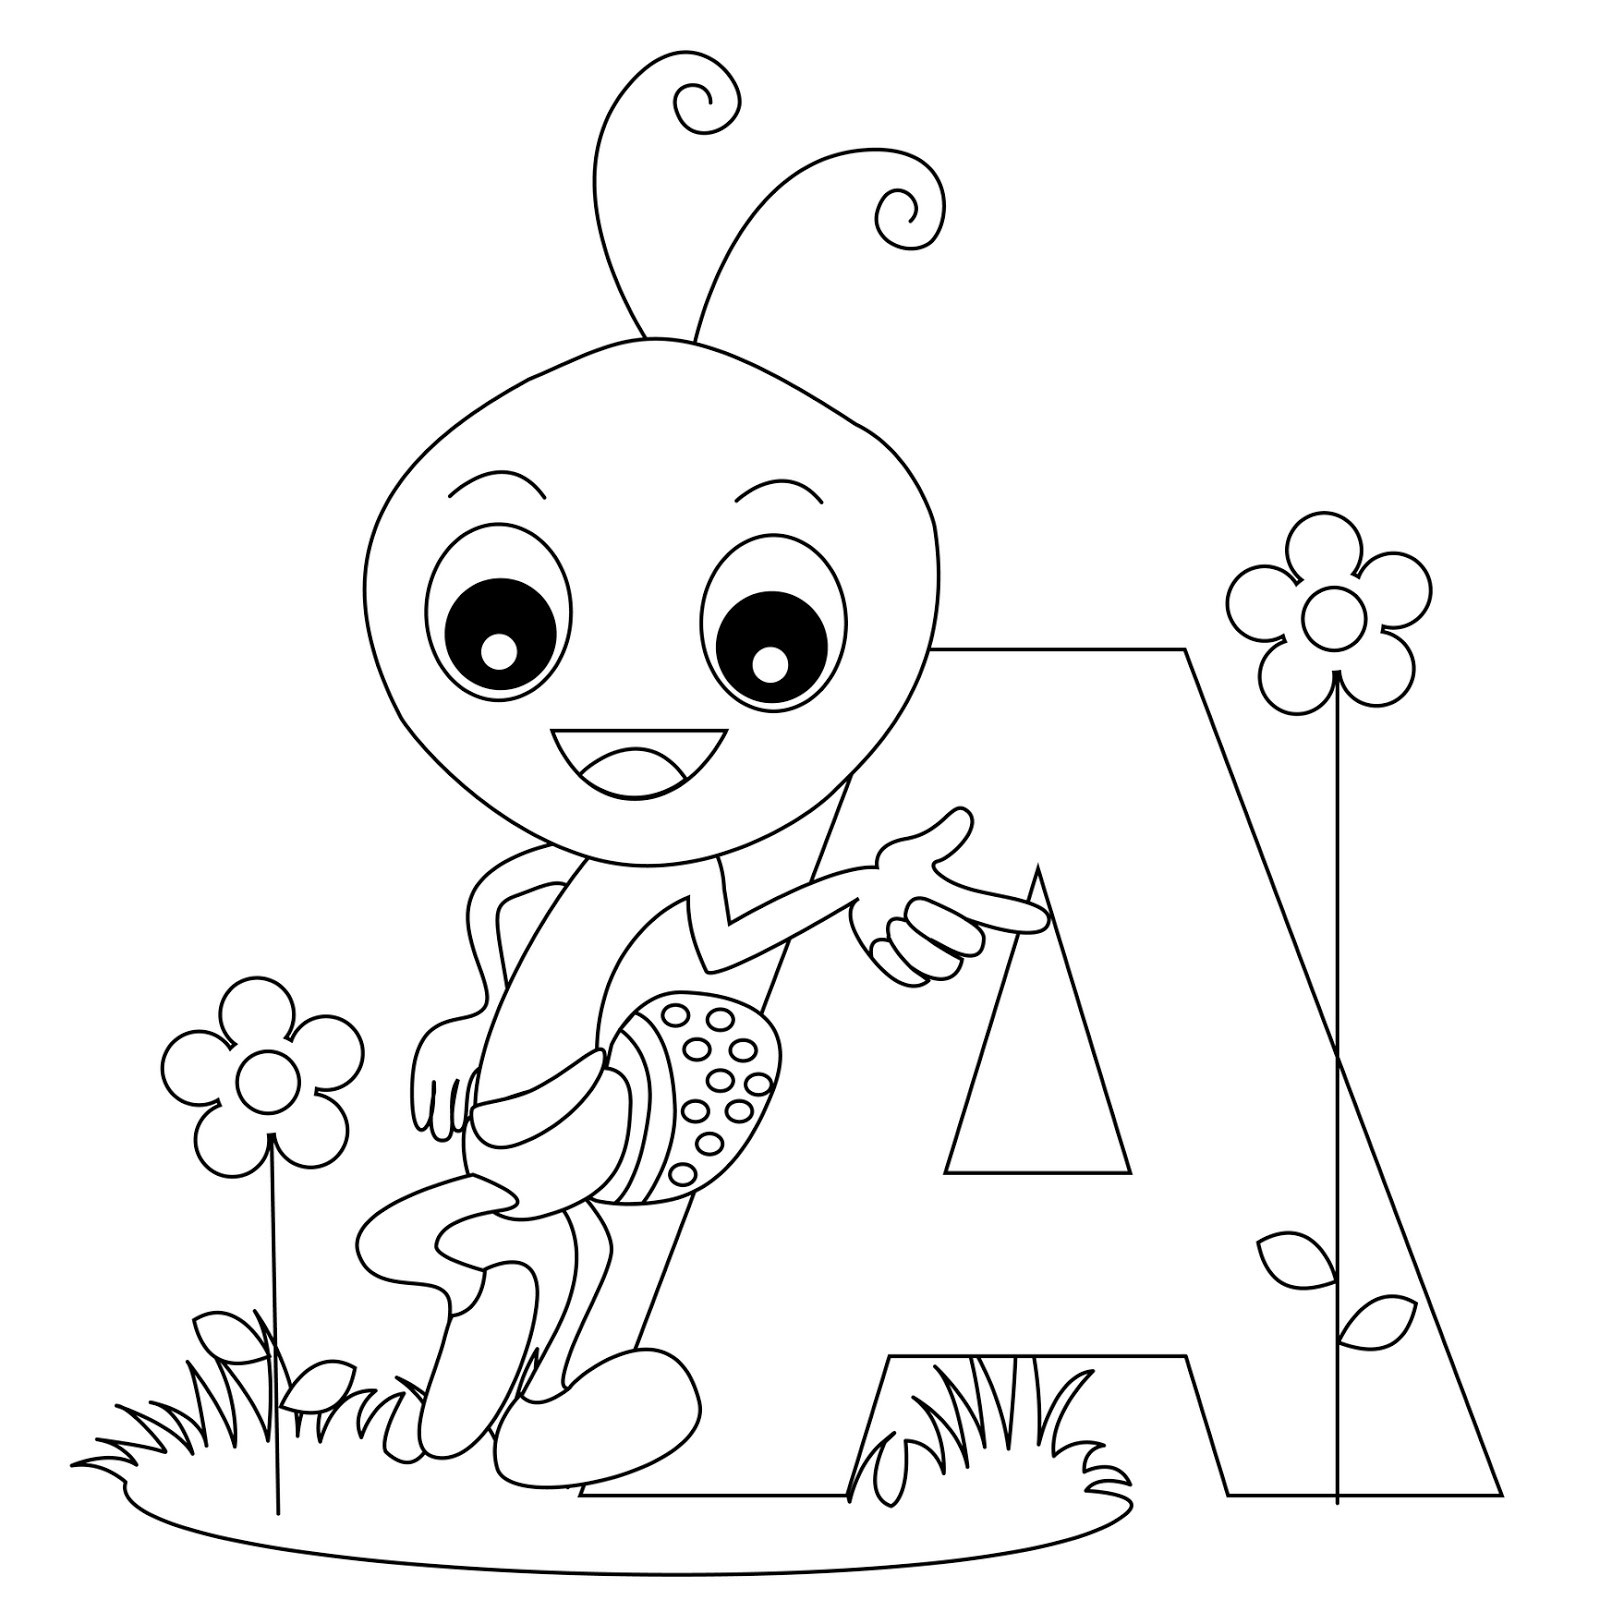 Letter A Coloring Pages For Toddlers
 Animal Alphabet Letter A coloring Child Coloring